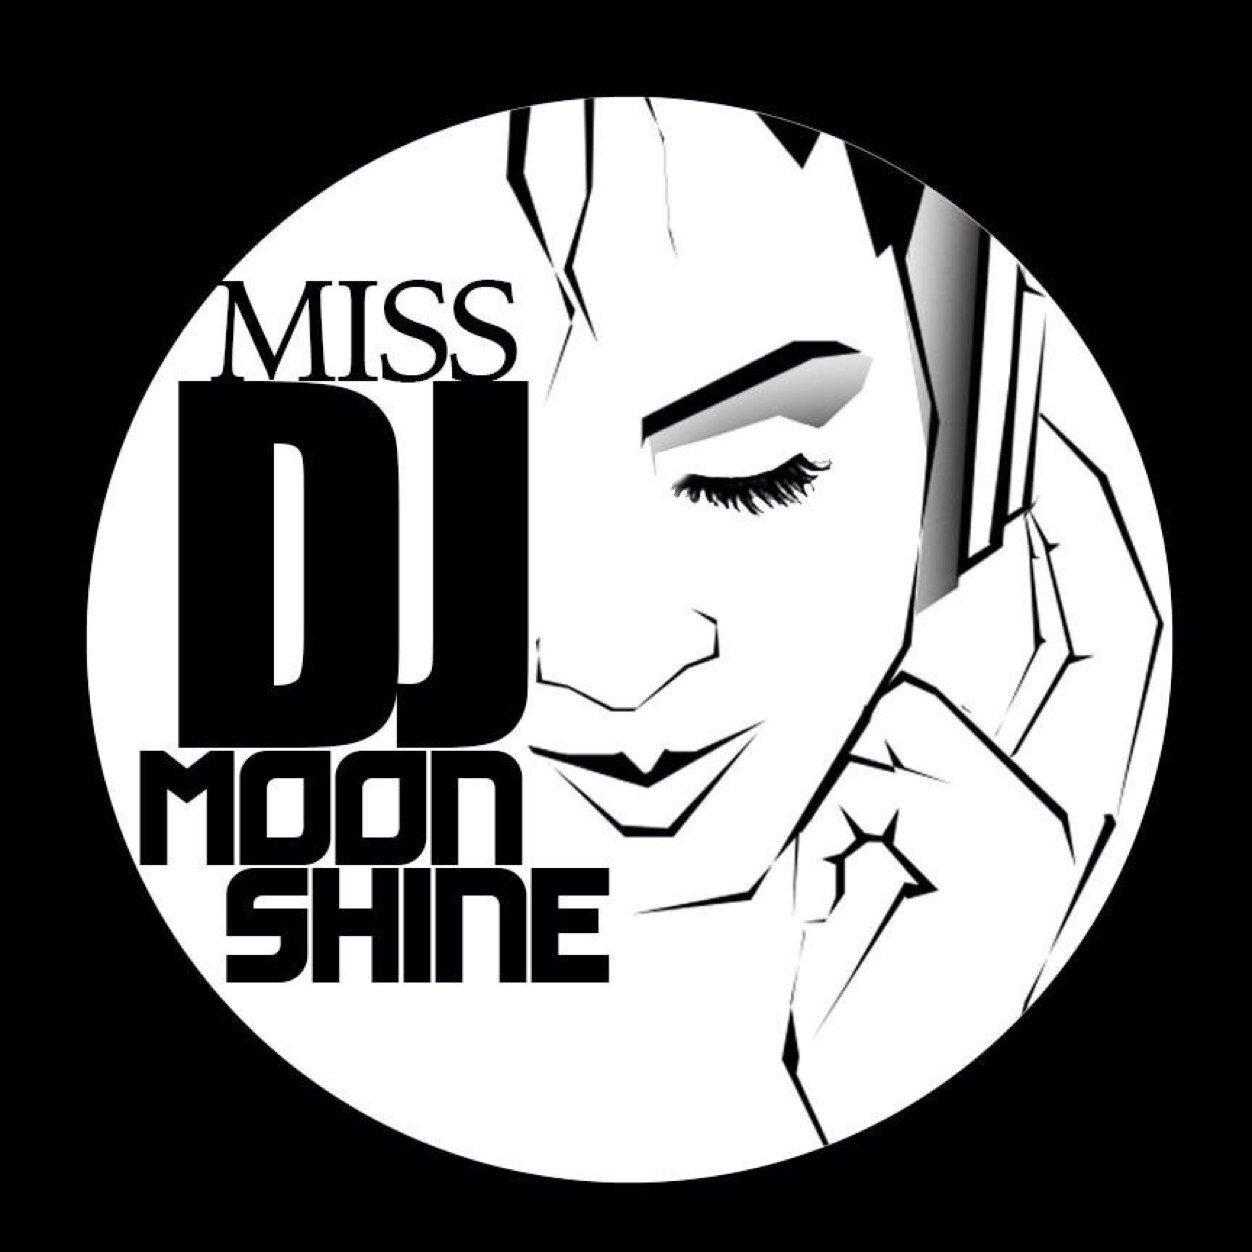 Im an inspiring DJ who is always looking for new opportunity. For booking info hit me at missdjmoonshine@yahoo.com #UTHOUGHTUTHOUGHTNTHENTHEREWASSOMEMORESHINE